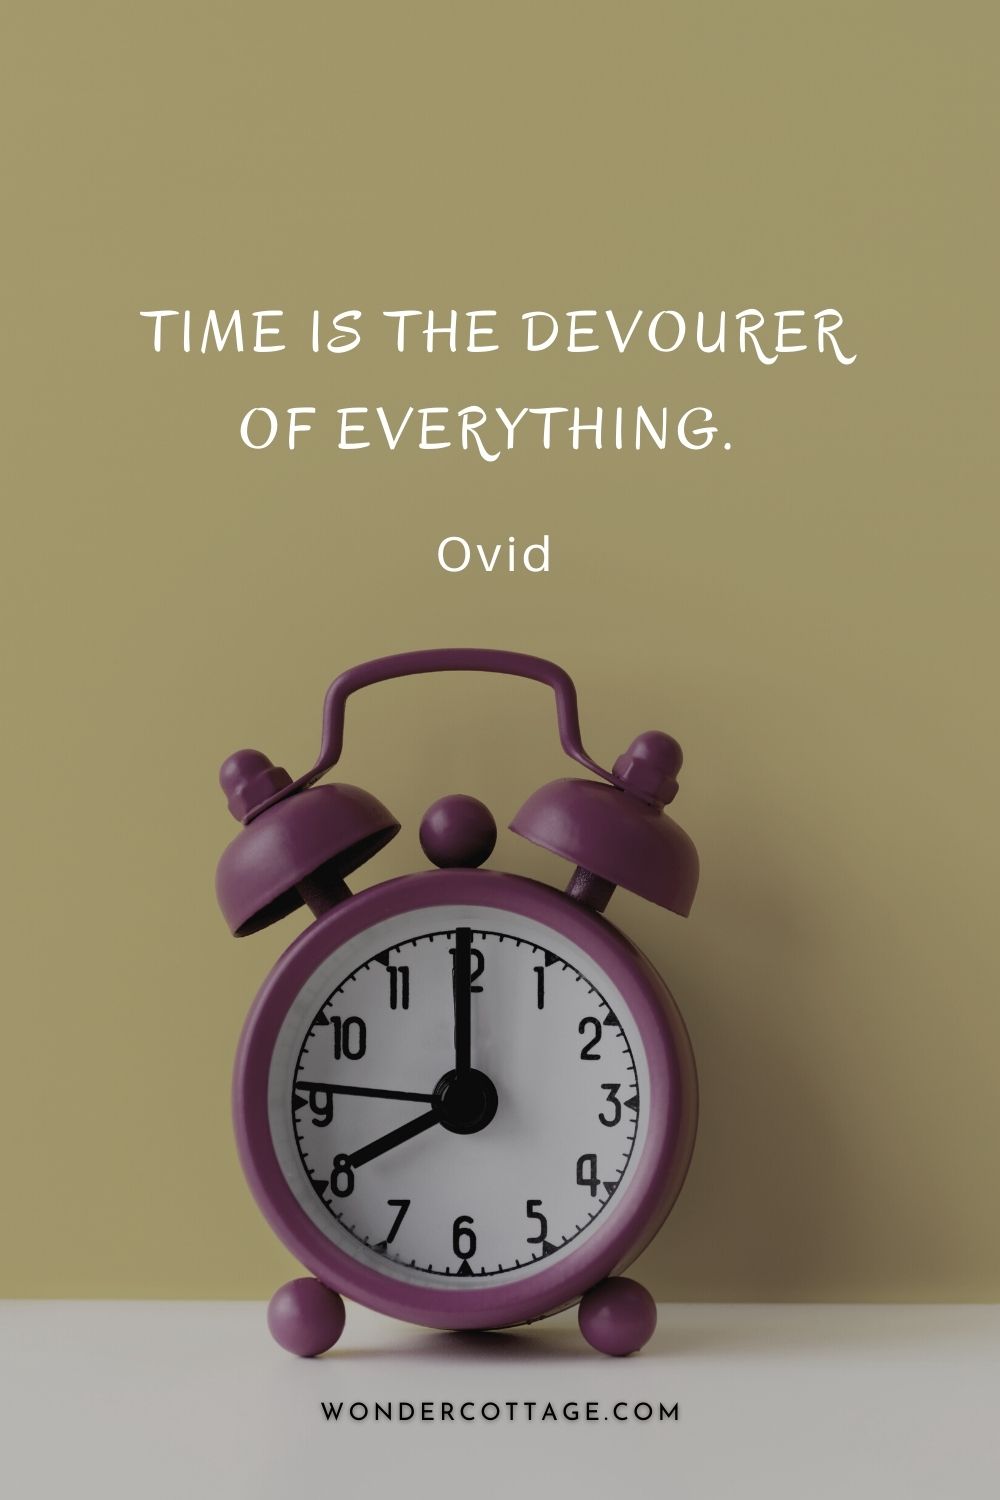 Time is the devourer of everything.  Ovid